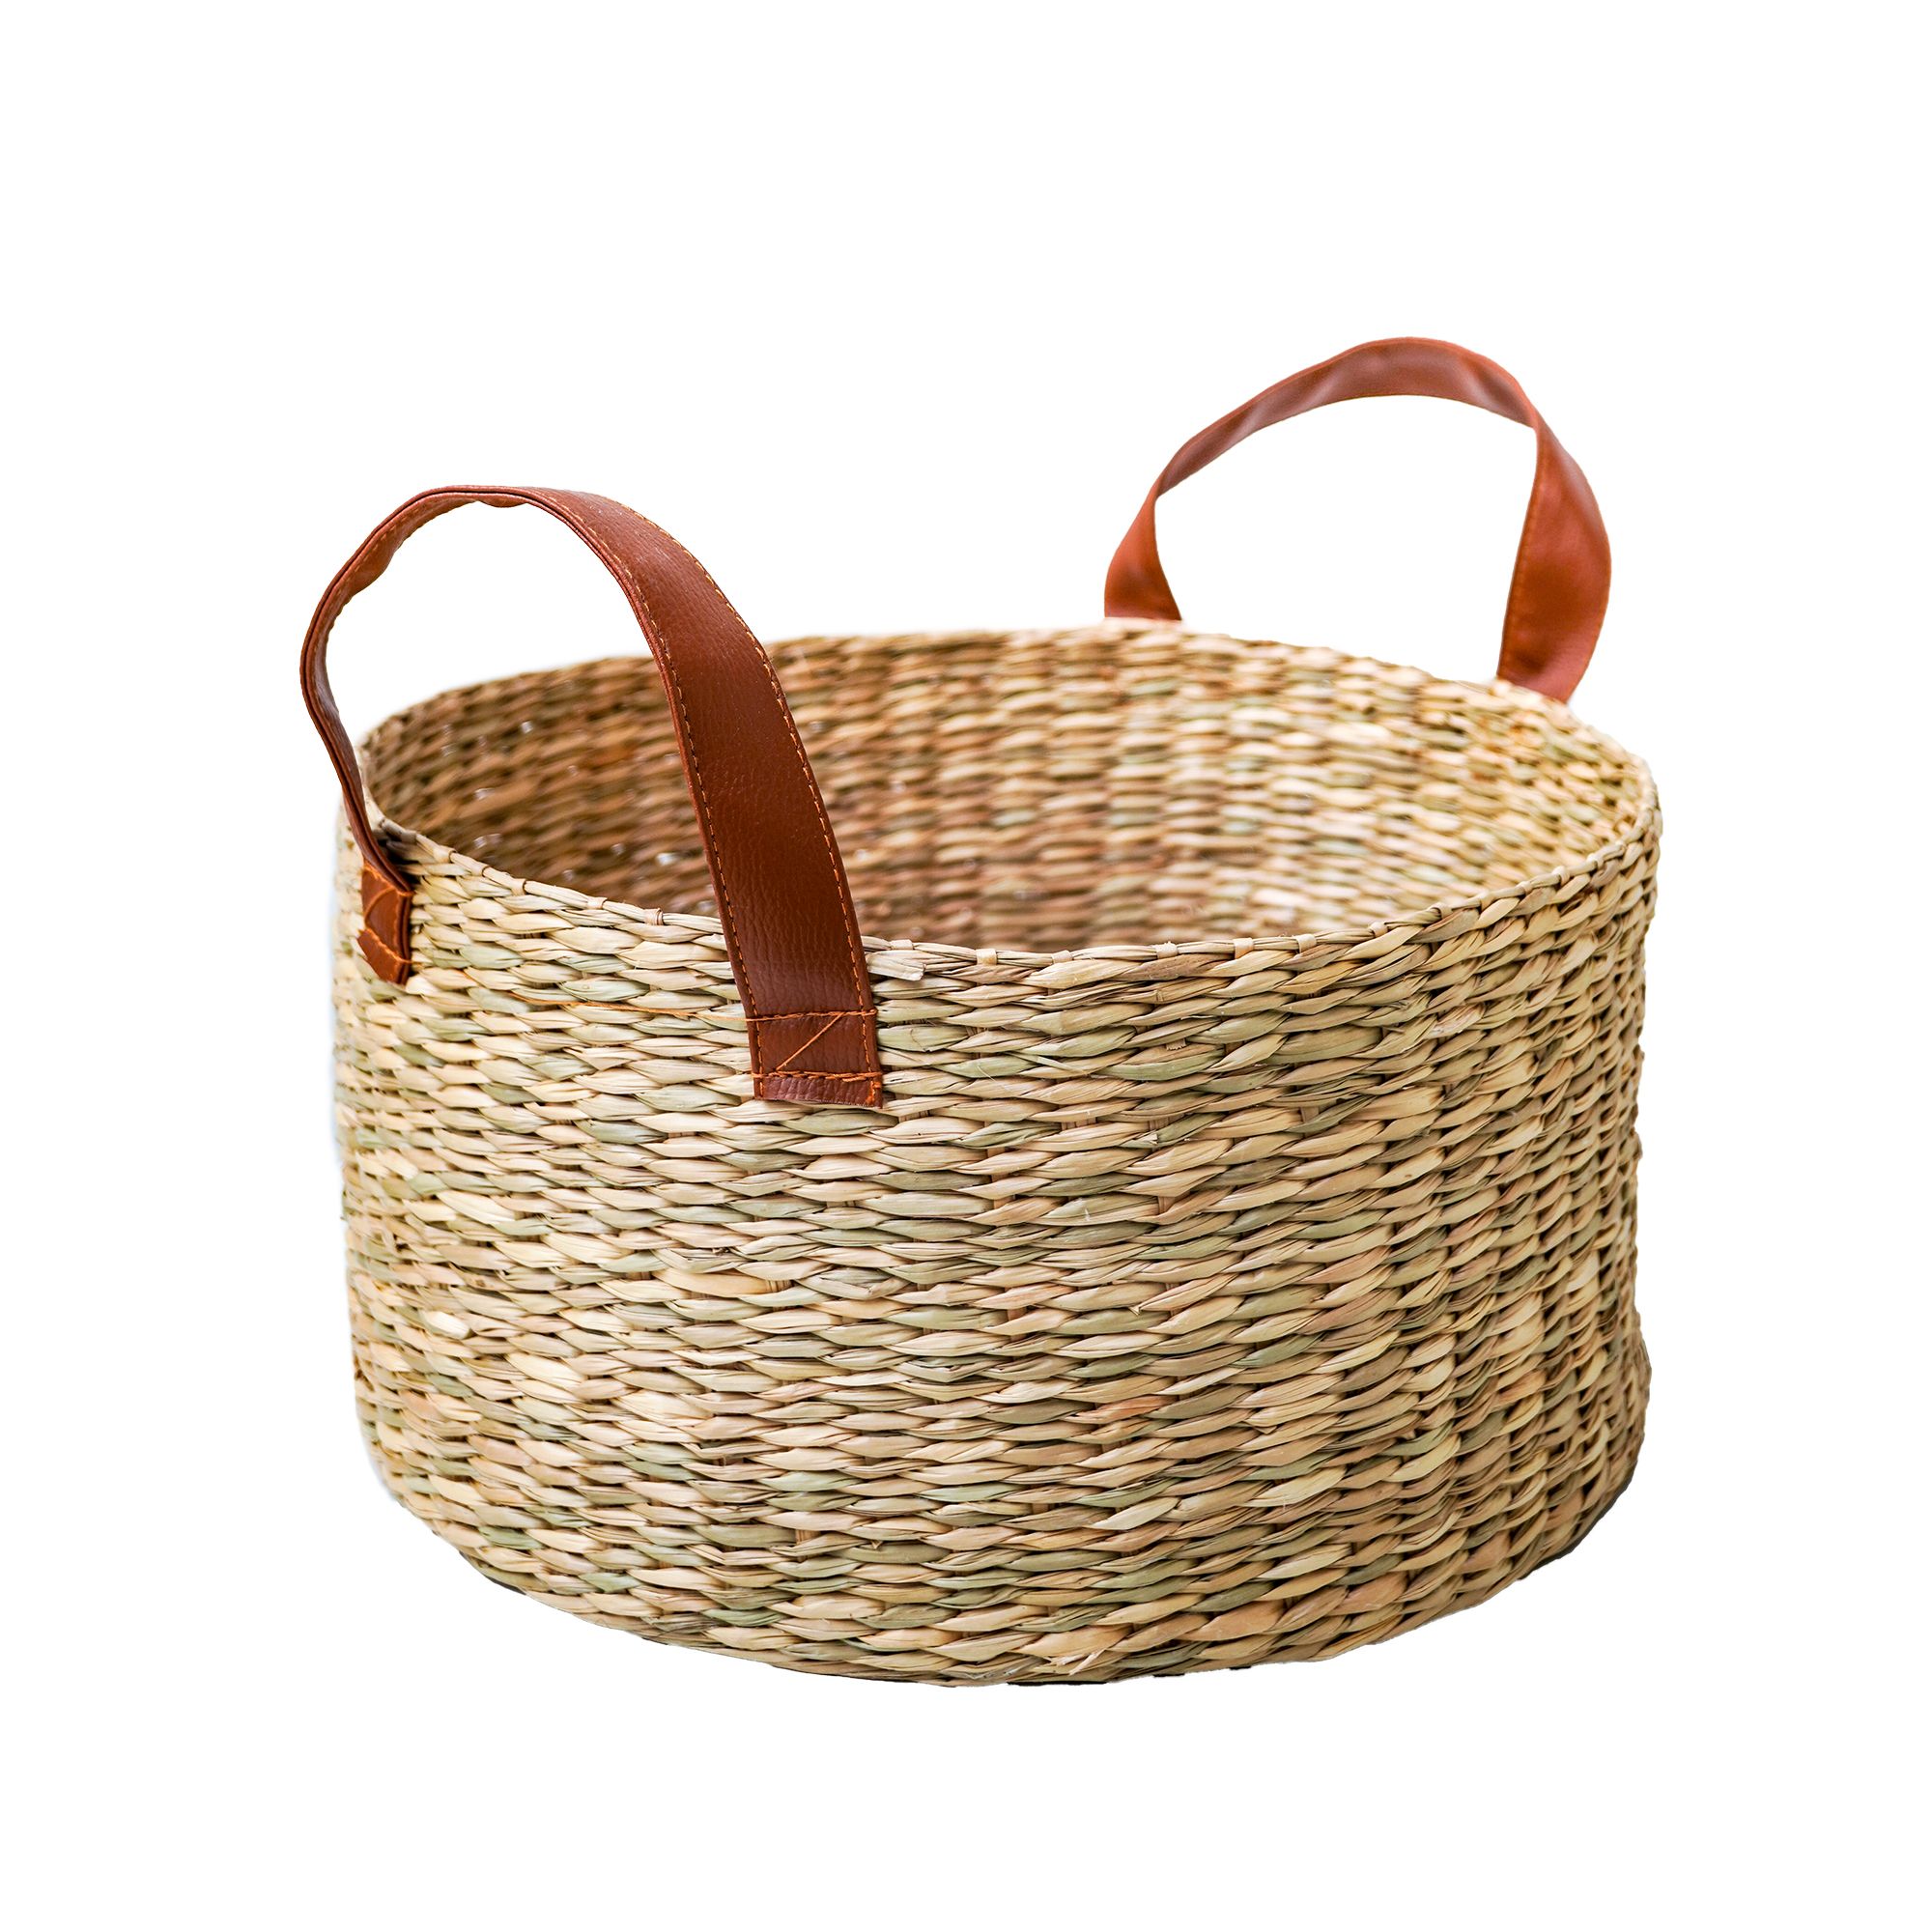  Round seagrass basket with handles 